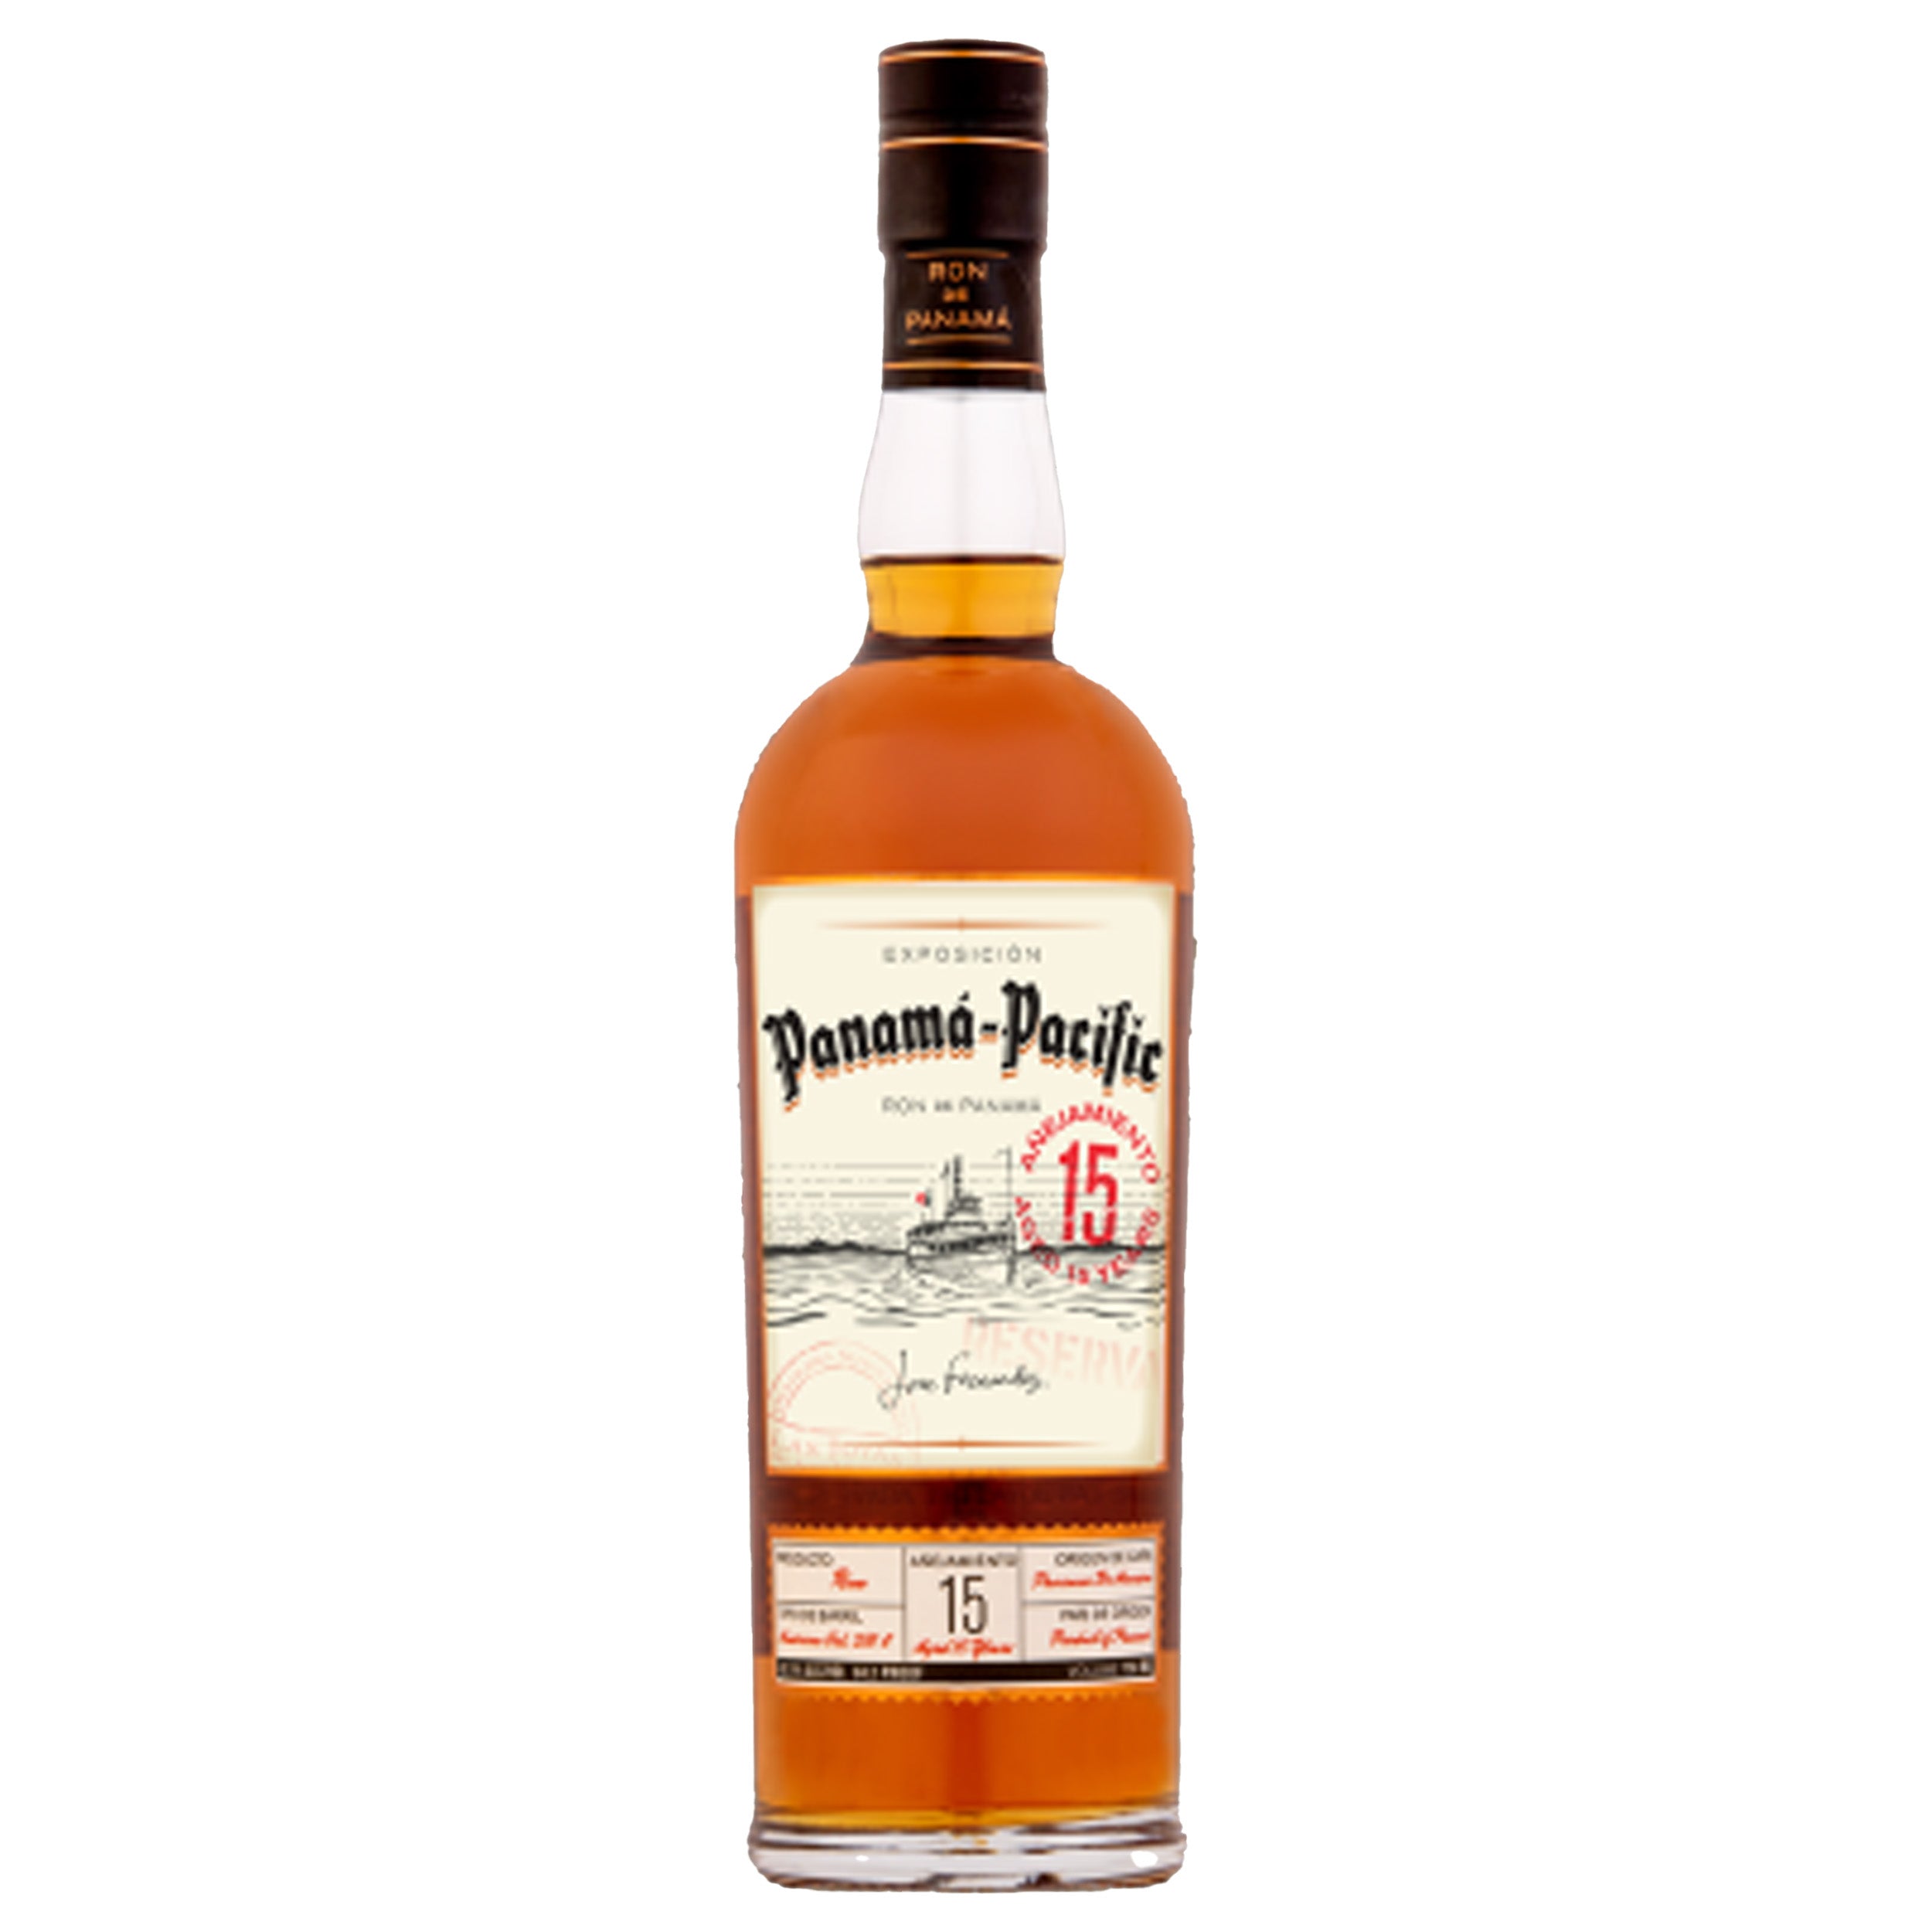 Panama Pacific 15 Year Old Rum